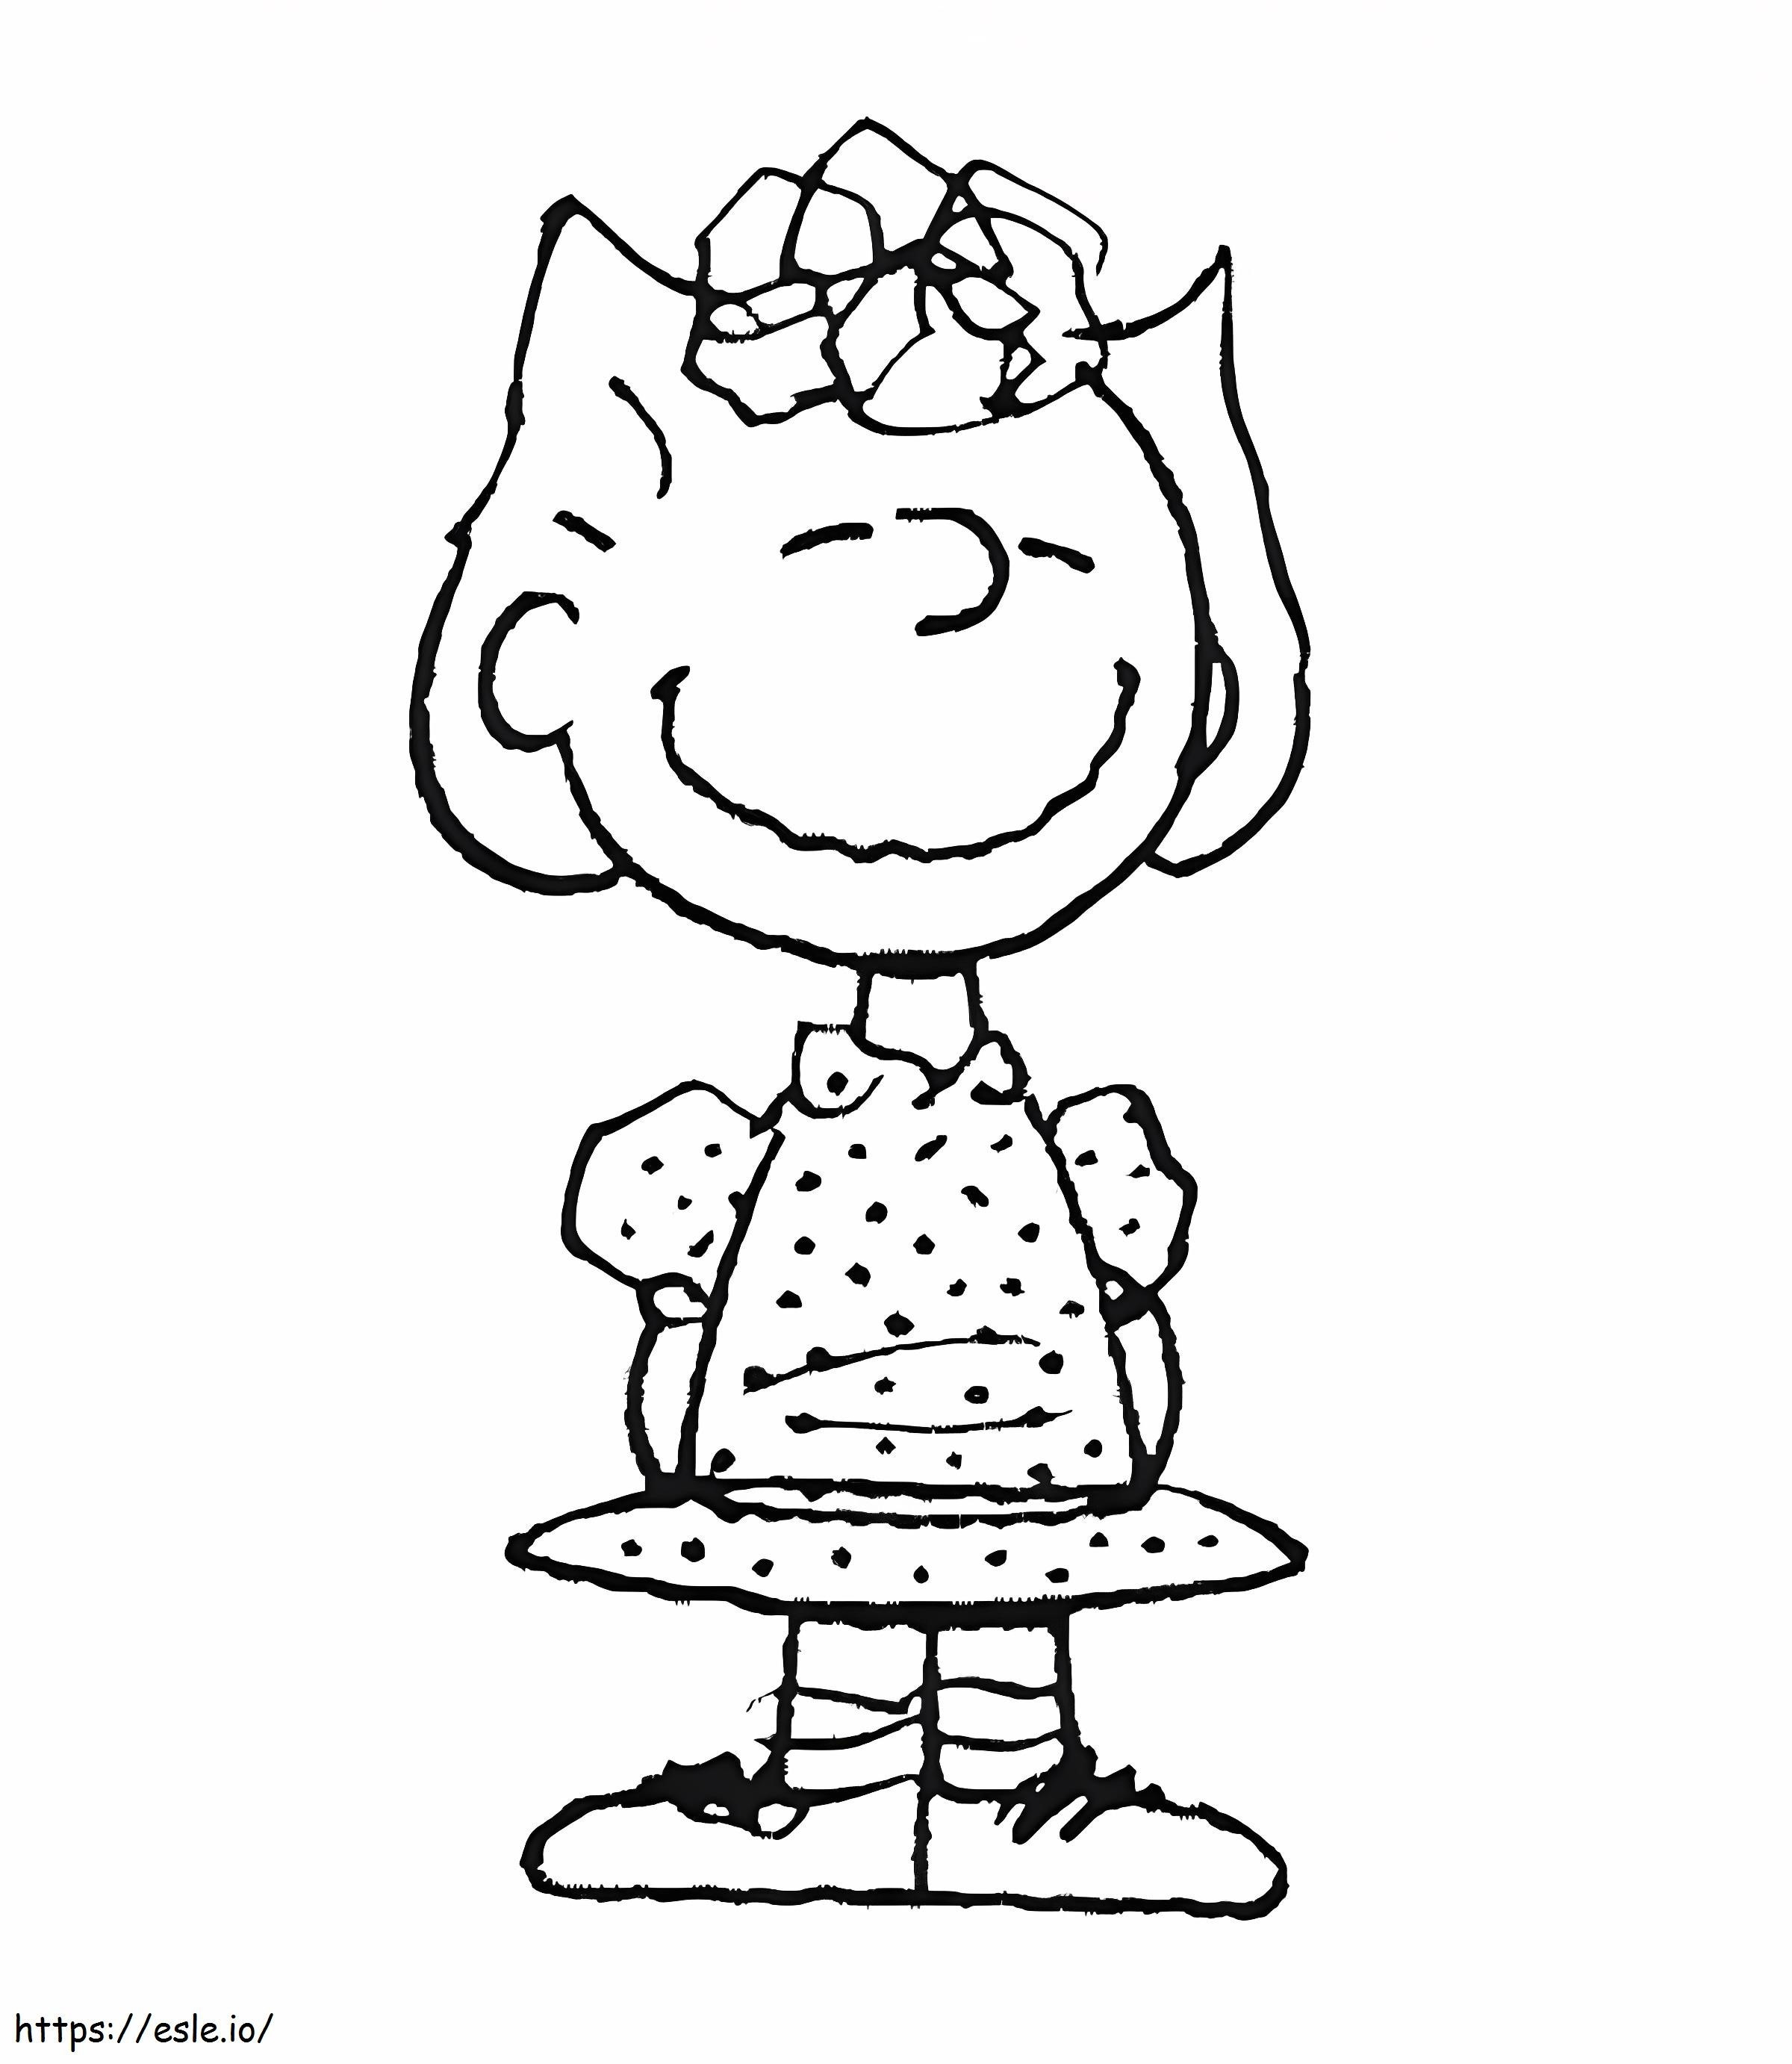 Sally Brown From Peanuts coloring page